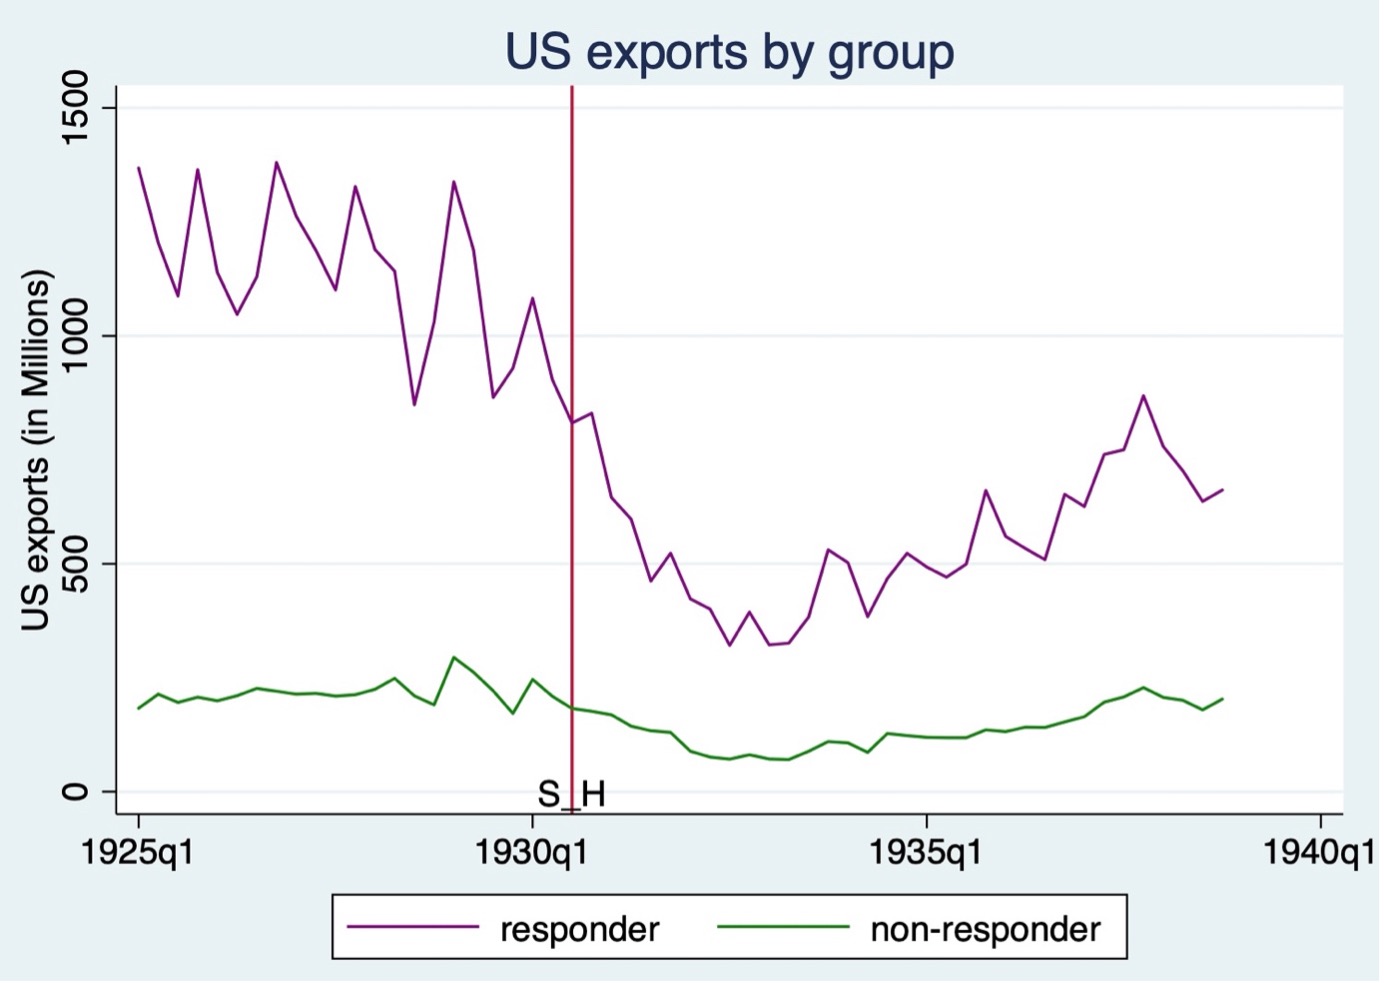 Figure 1 US exports before and after the passage of Smoot-Hawley